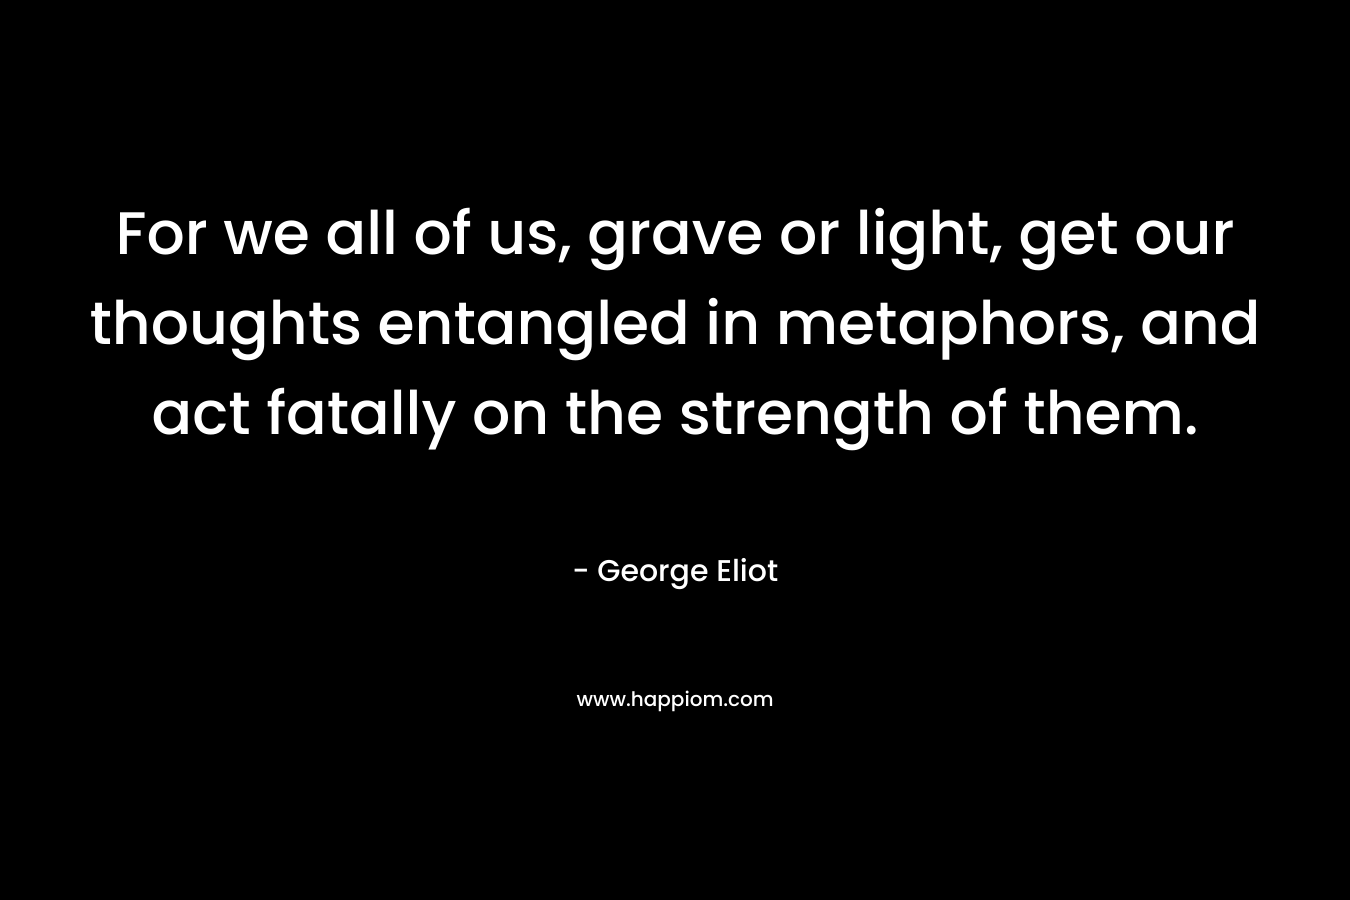 For we all of us, grave or light, get our thoughts entangled in metaphors, and act fatally on the strength of them.